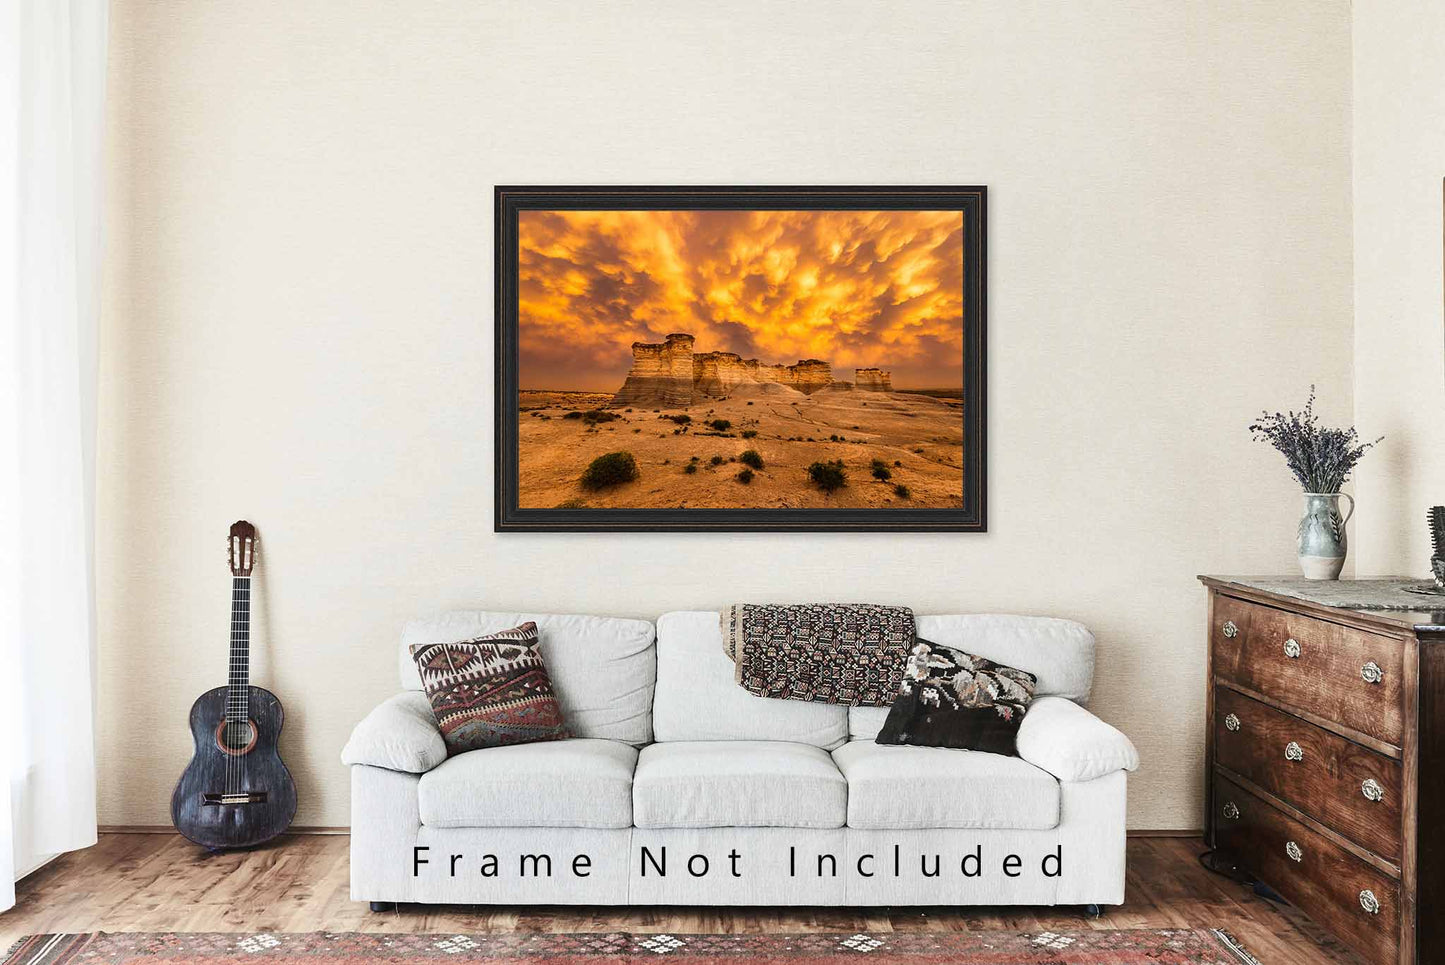 Great Plains Photo Print | Stormy Sky Over Monument Rocks Picture | Kansas Wall Art | Prairie Photography | Nature Decor